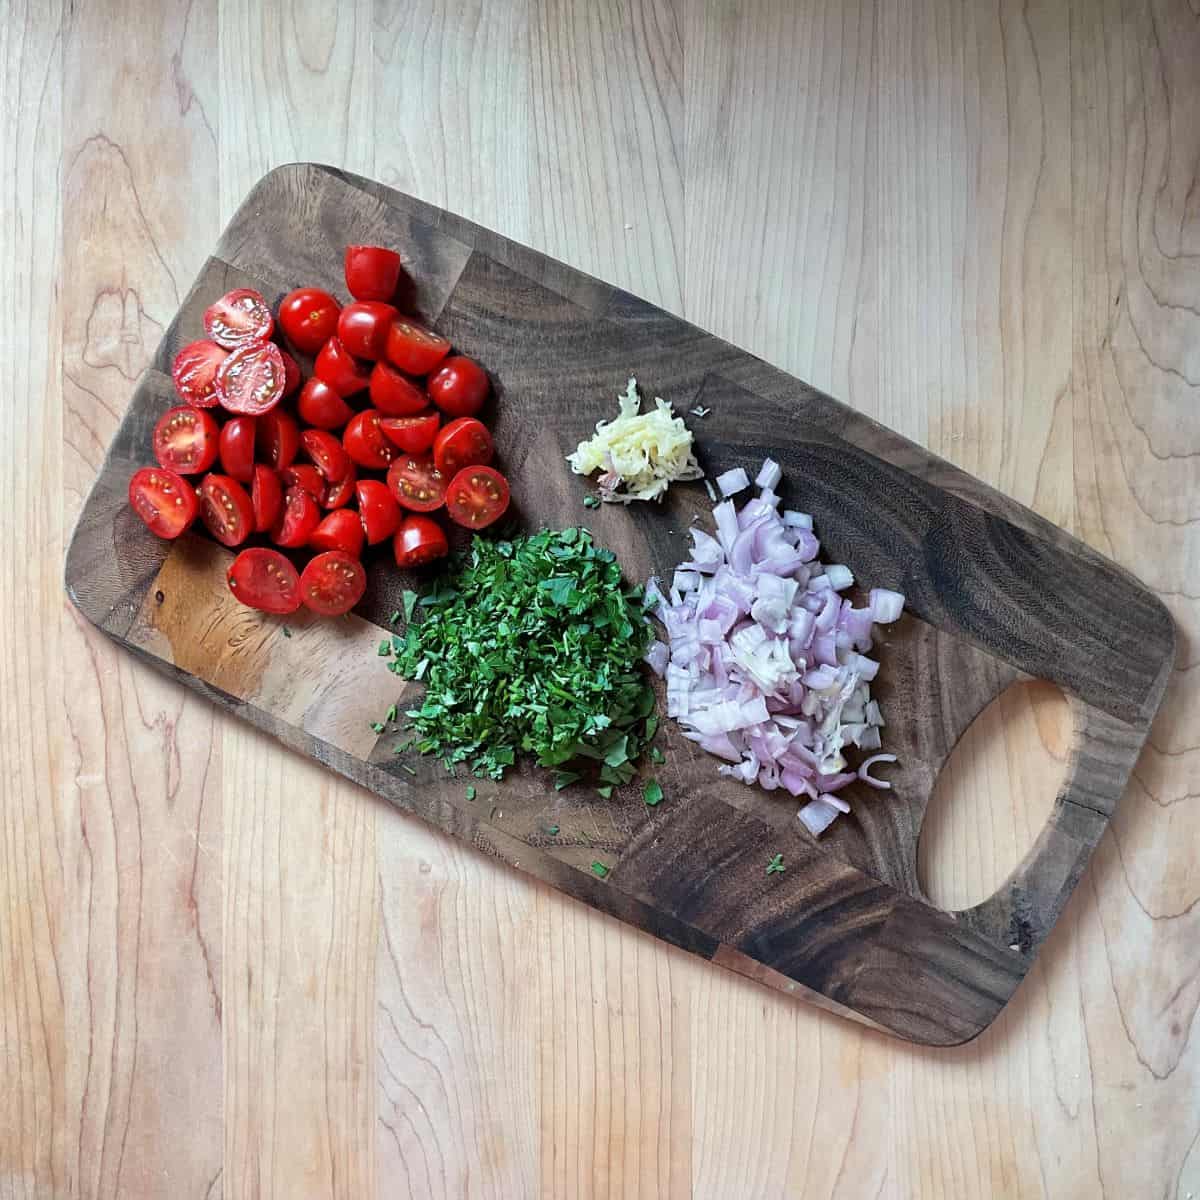 Minced ingredients on a wooden board.